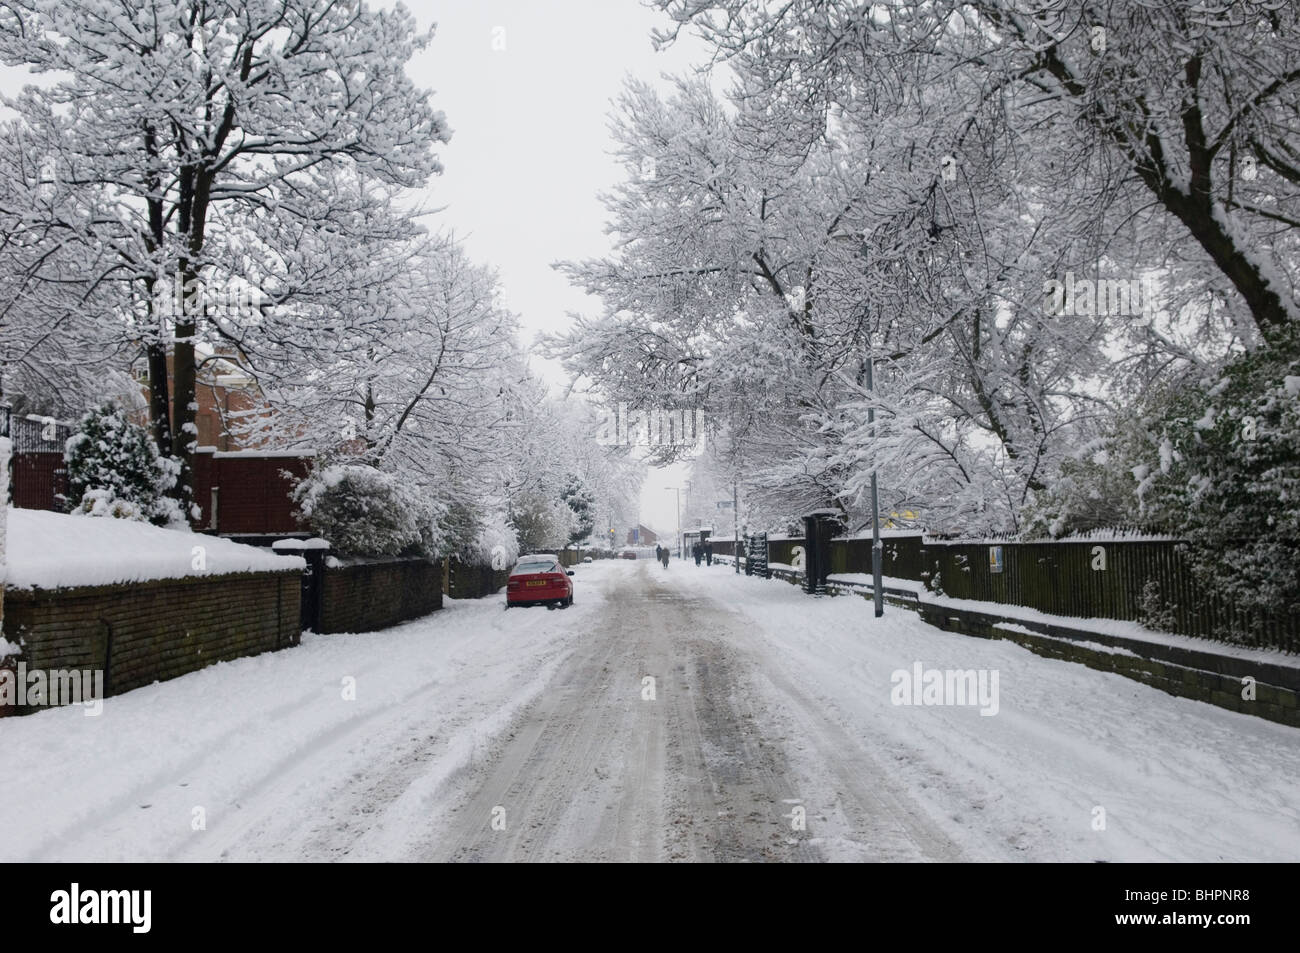 Urban street and trees covered with snow in bad weather conditions Manchester UK Stock Photo